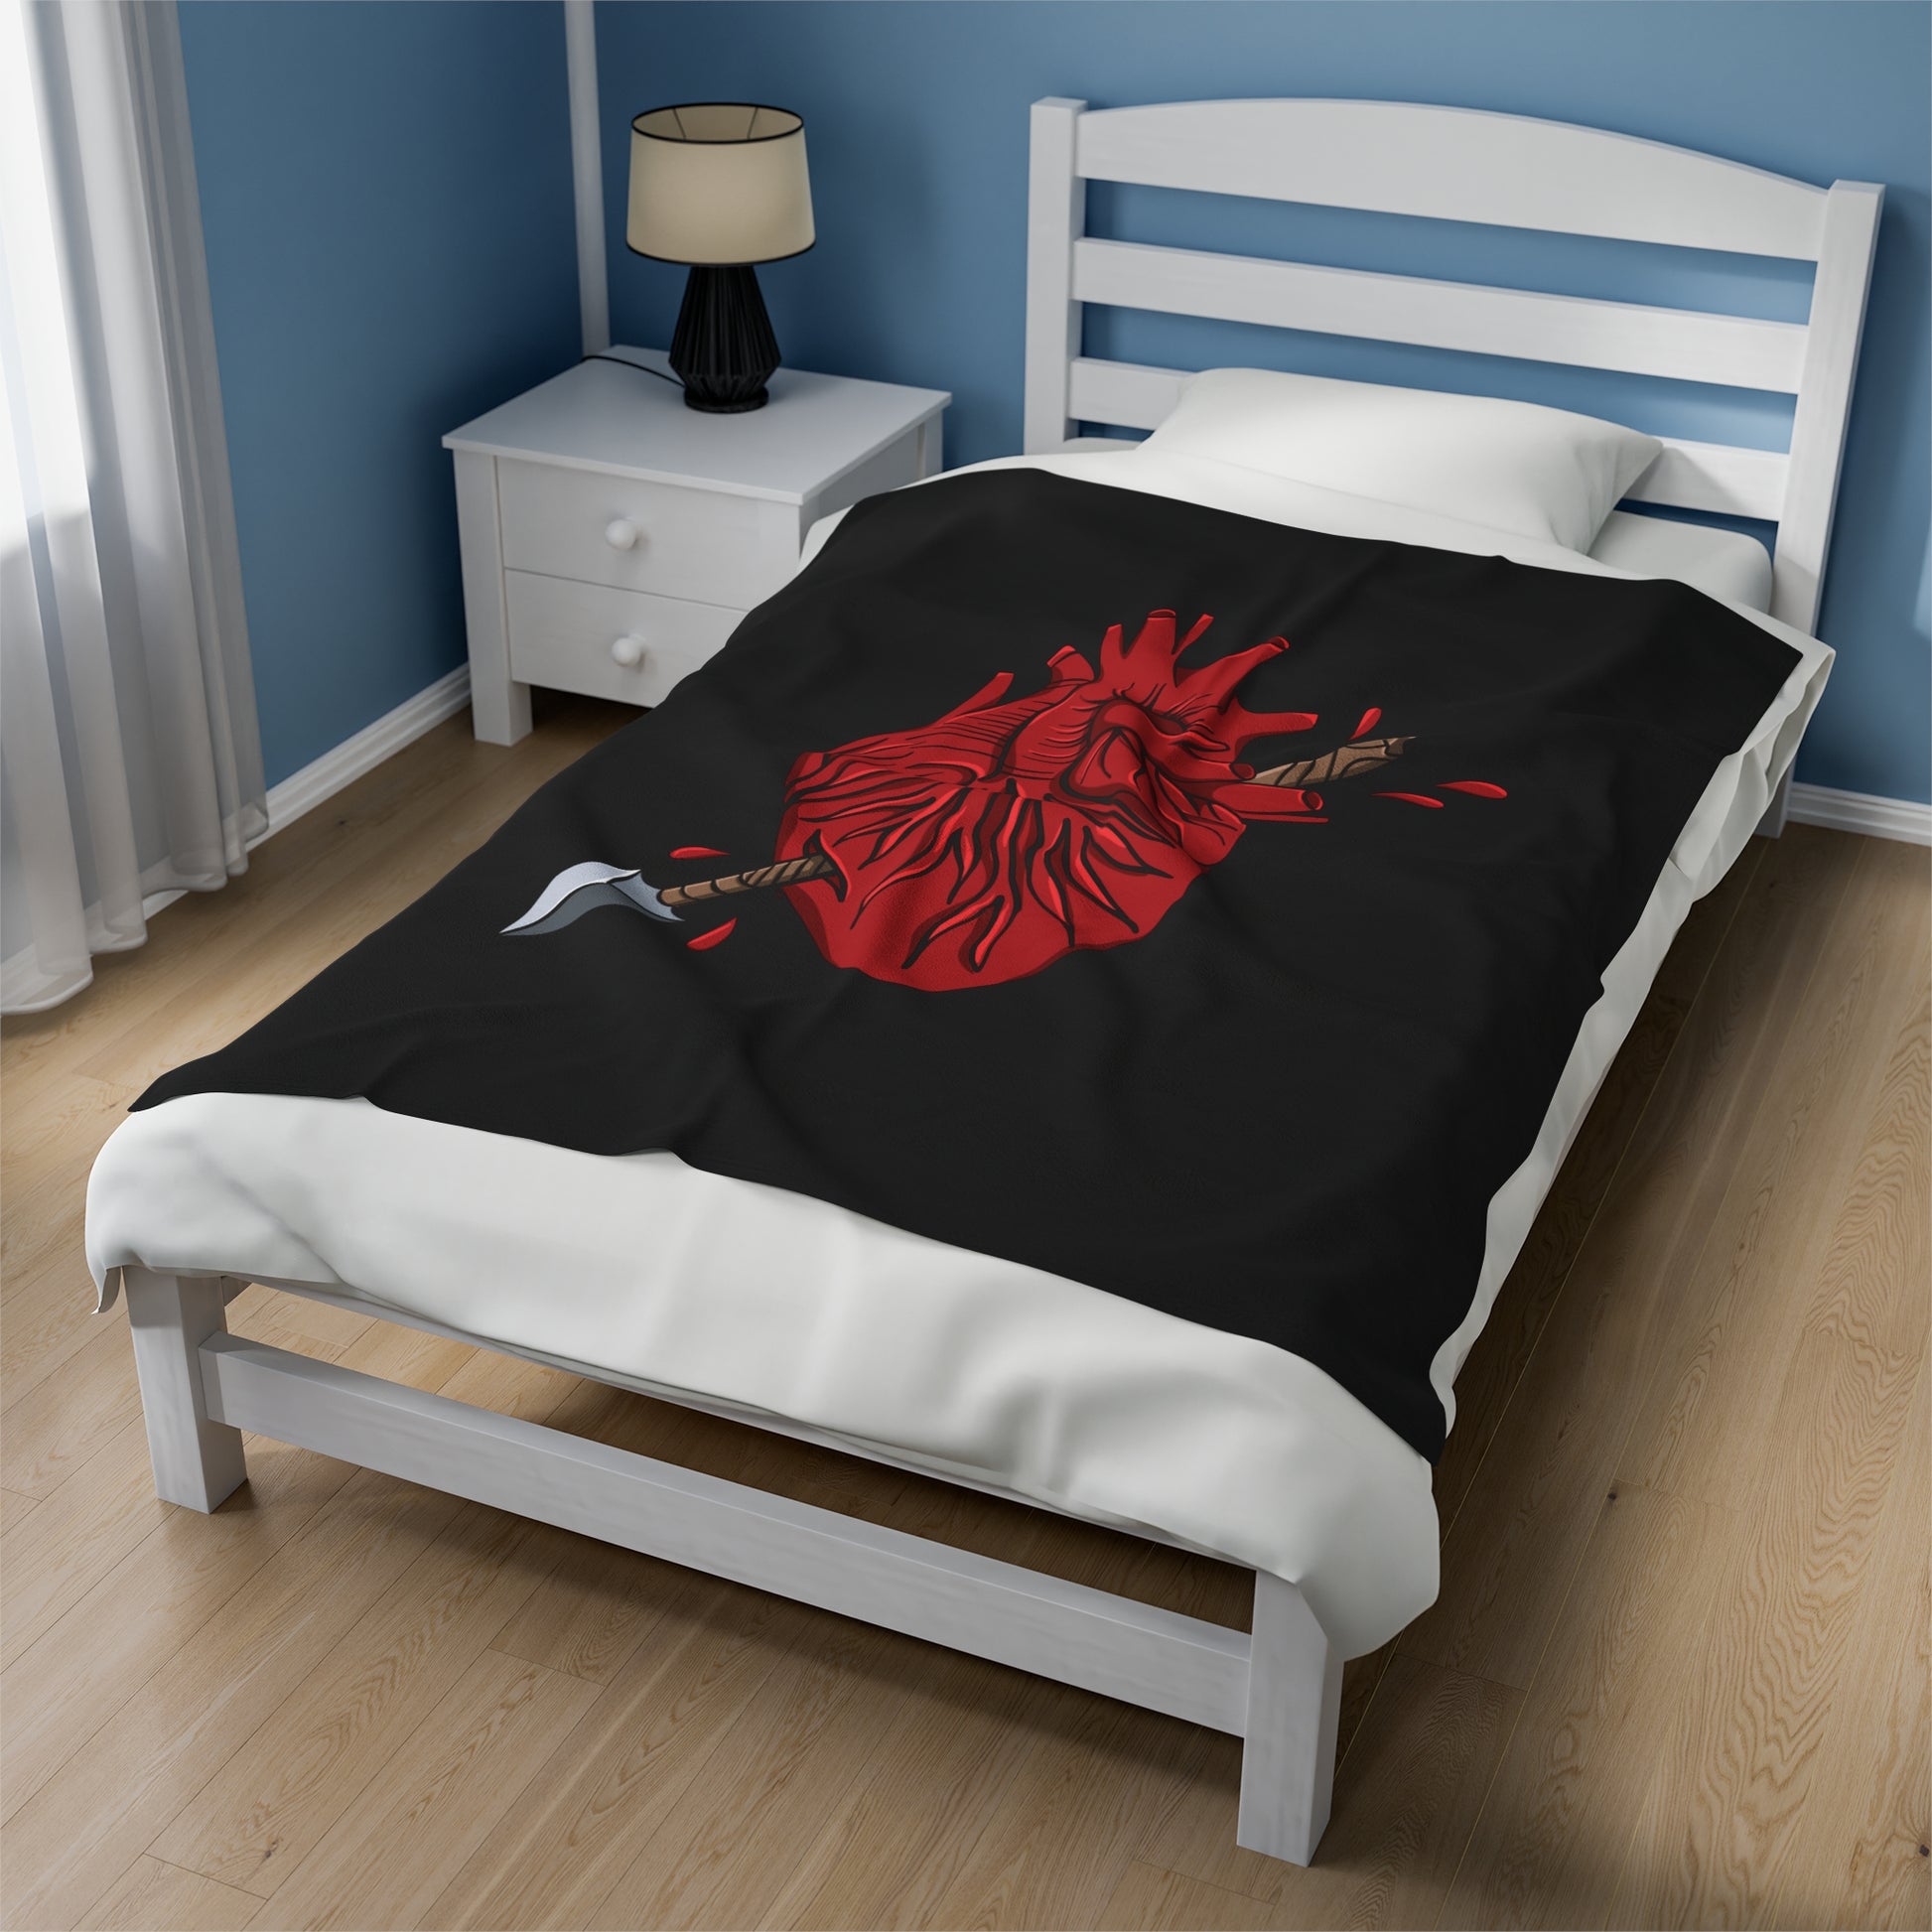 Black blanket with an illustration of an arrow piercing an anatomical heart being used as a bedspread.